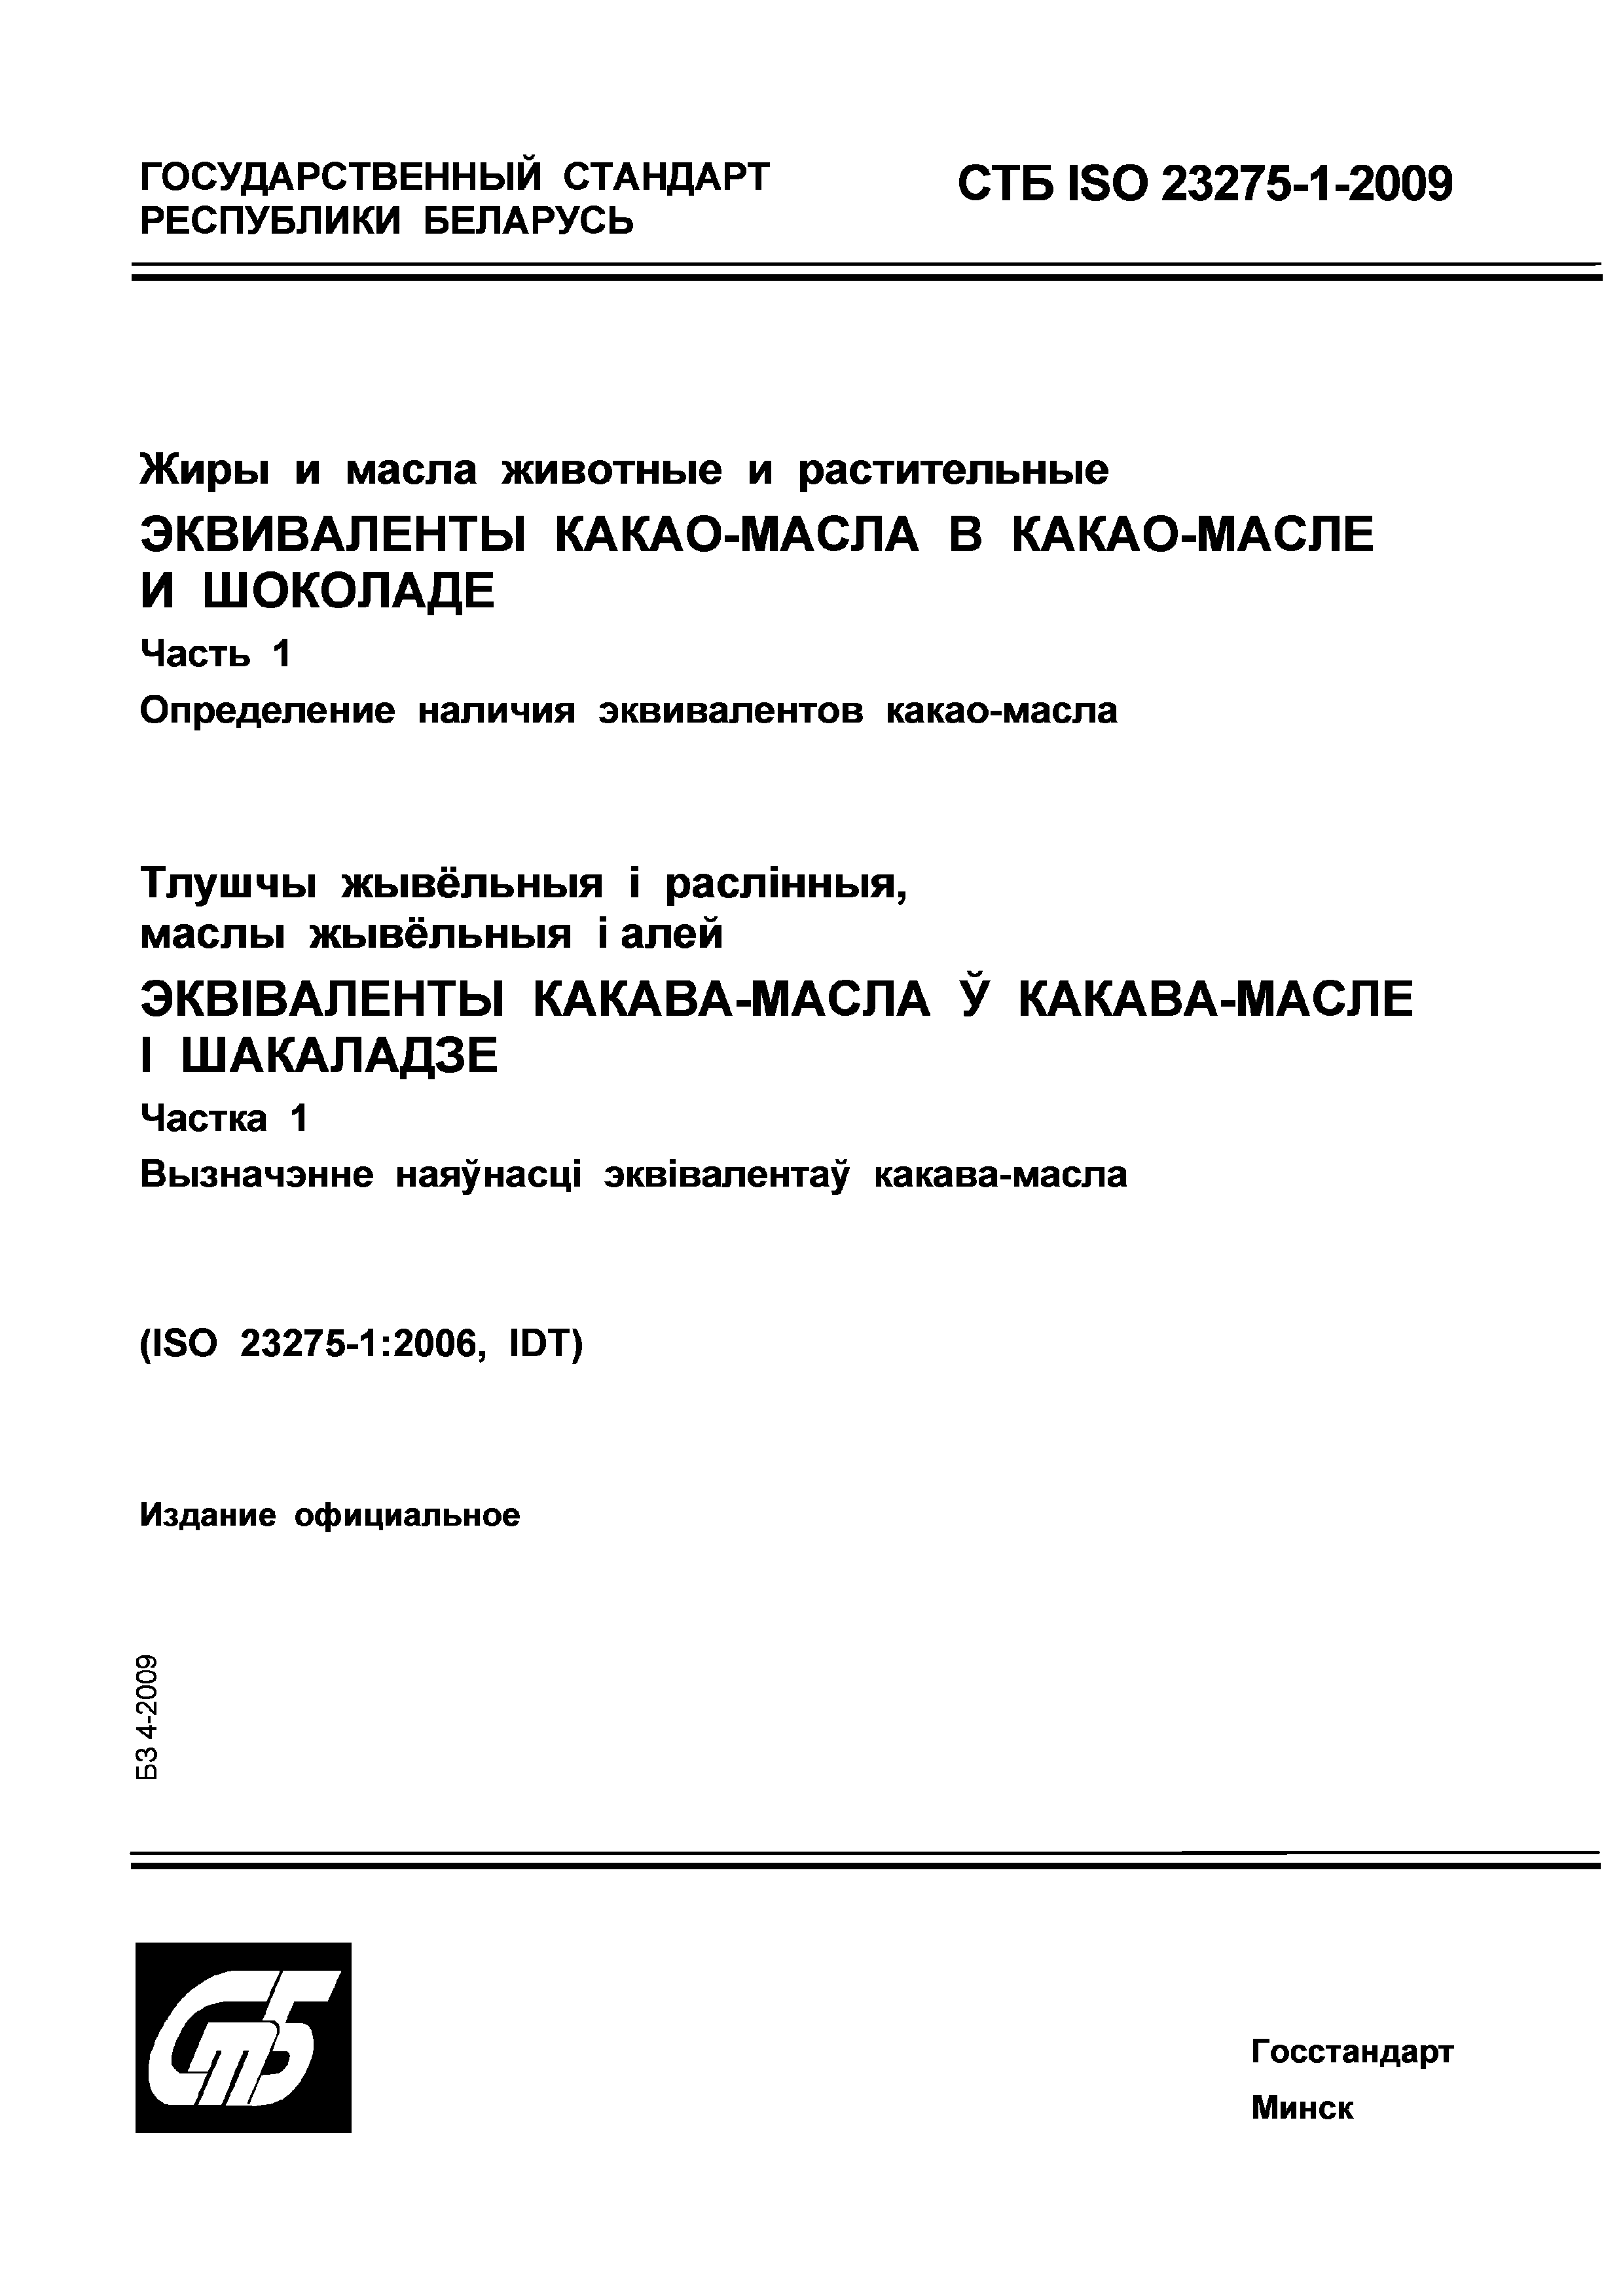 СТБ ISO 23275-1-2009